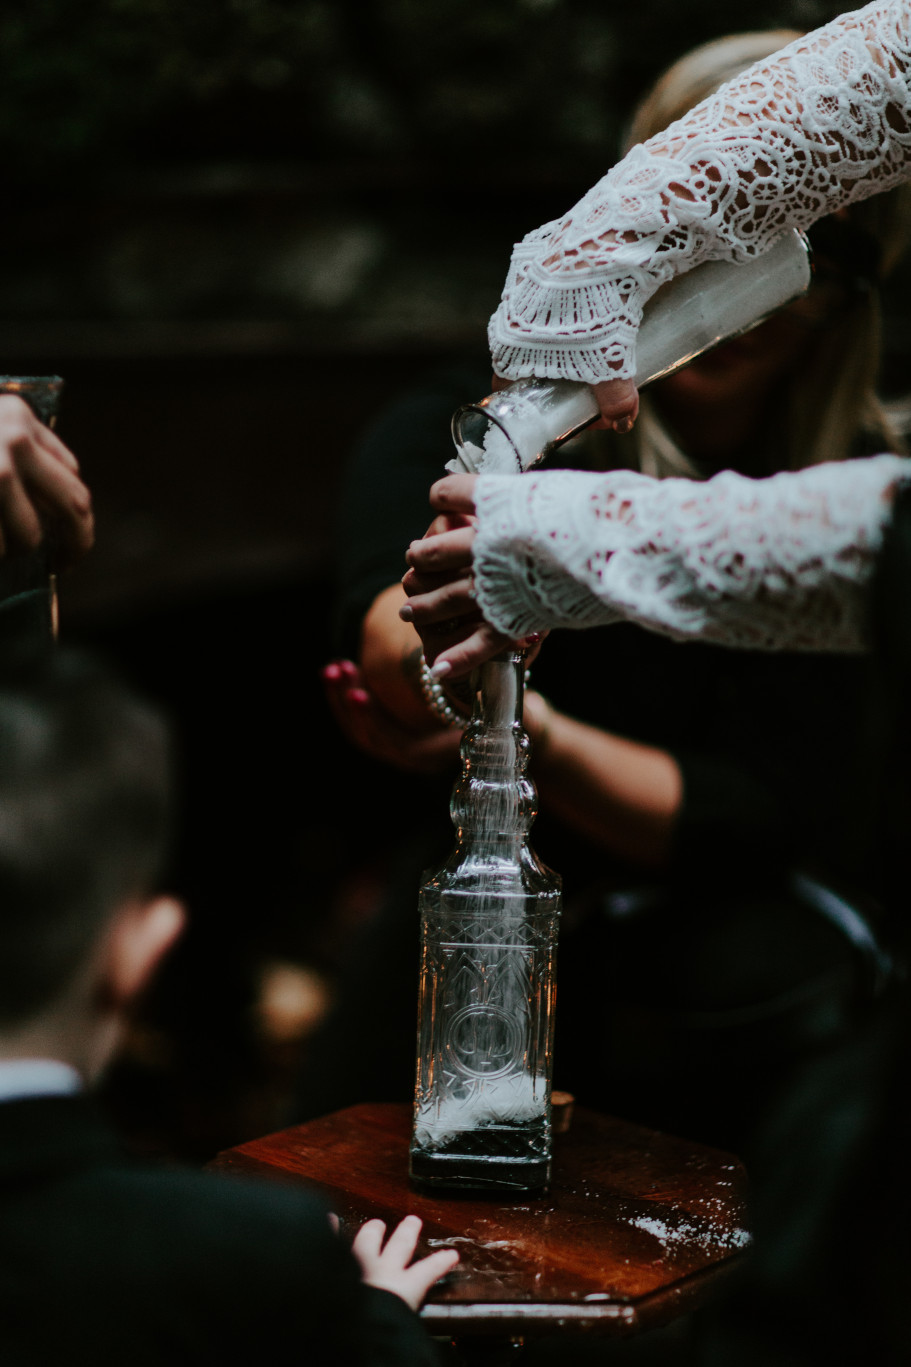 Sarah pours sand into a bottle at Skamania House, Washington. Elopement photography in Portland Oregon by Sienna Plus Josh.